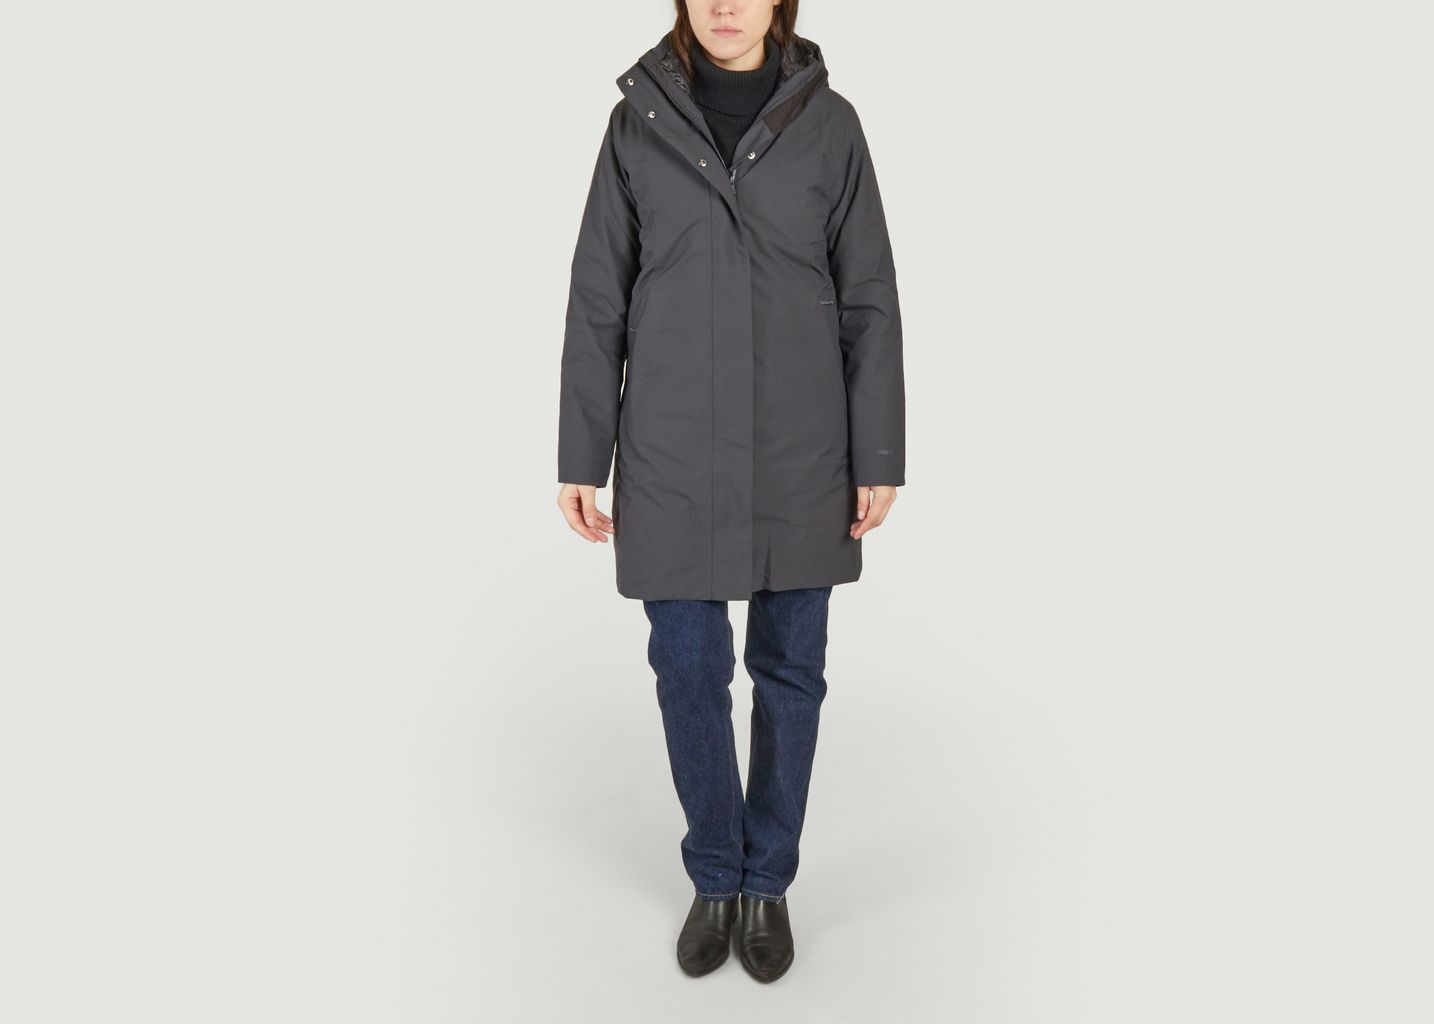 Tres 3 in 1 Parka - Patagonia